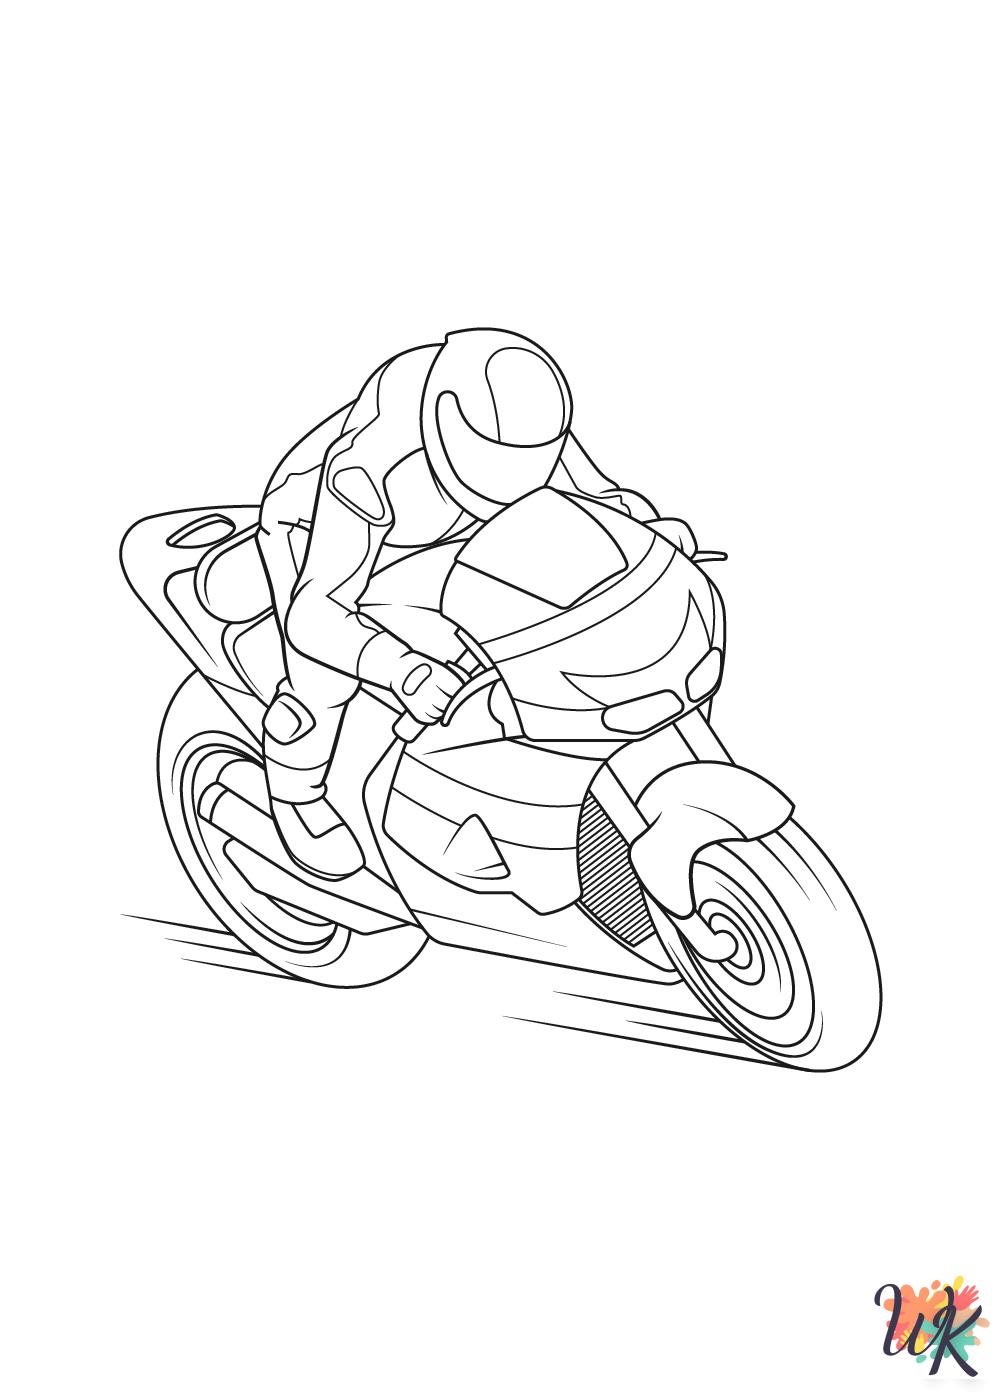 Motorcycle Coloring Pages 25